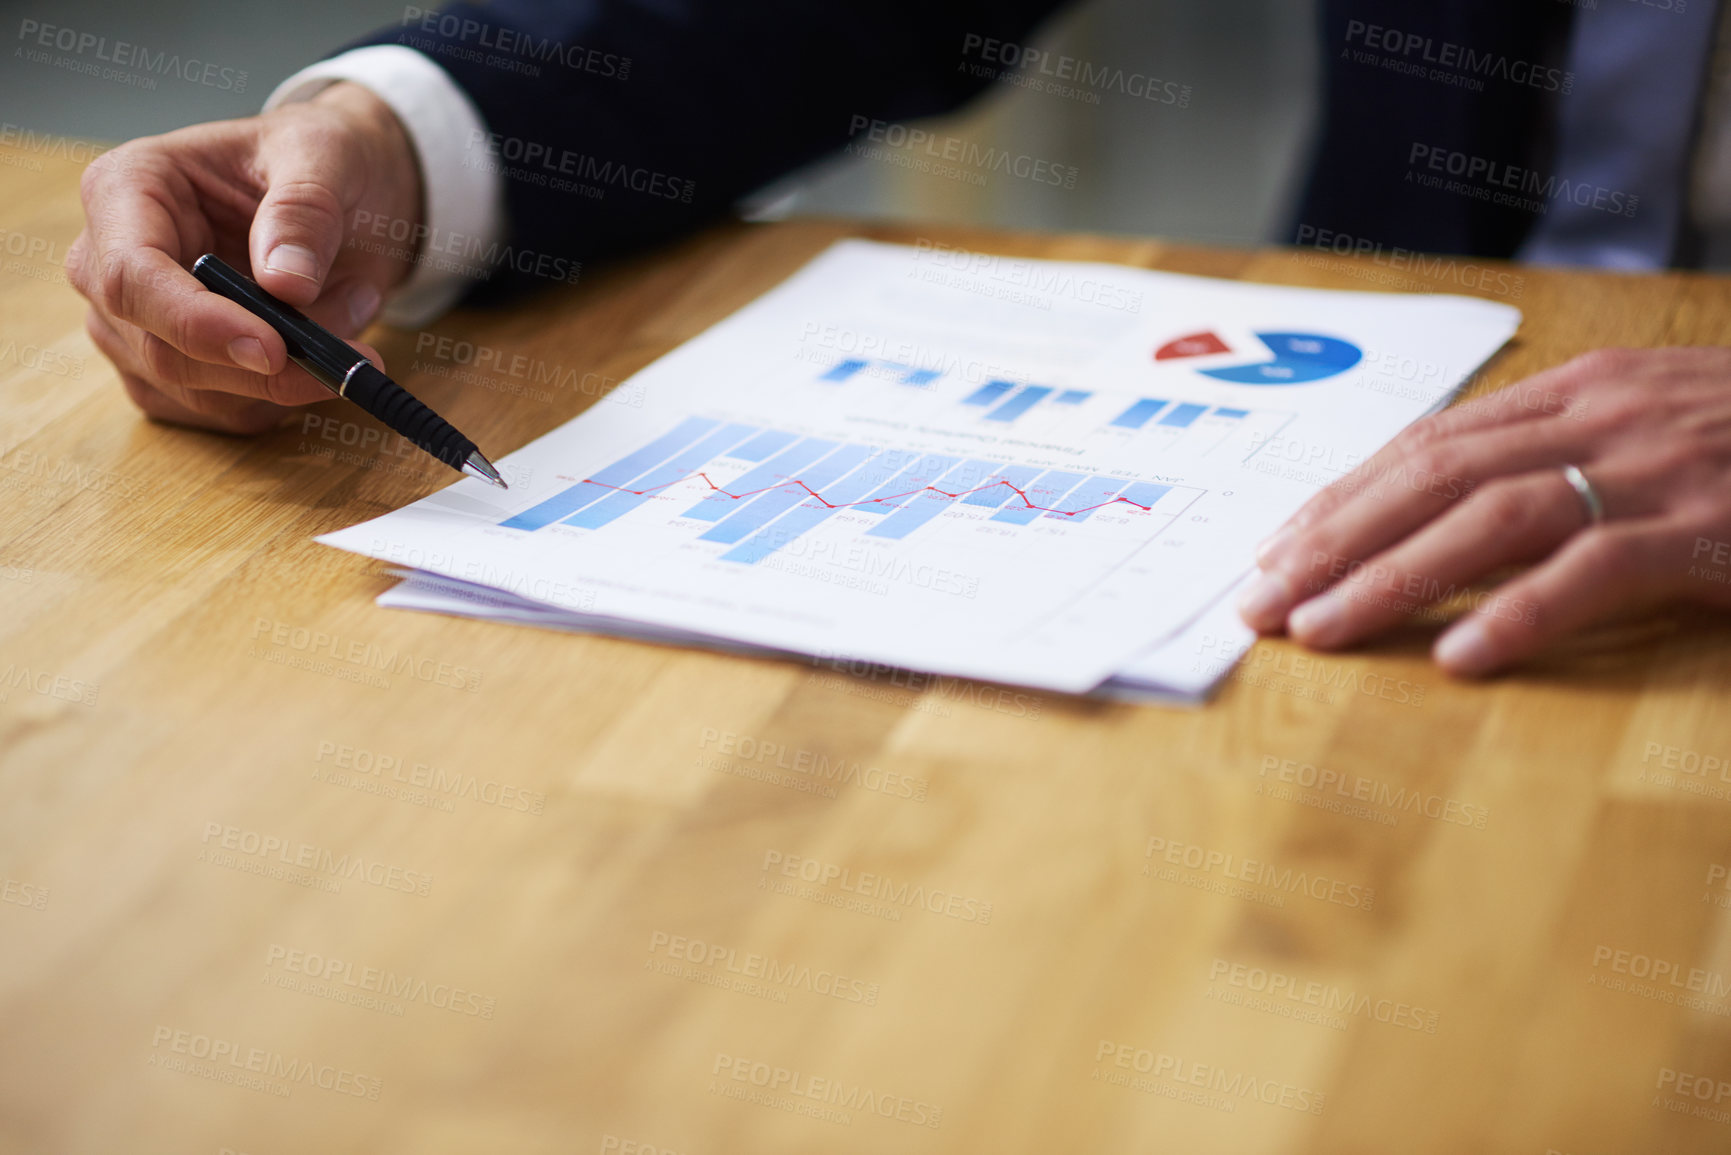 Buy stock photo Closeup shot of a businessman sitting at a table in an office going through graphs